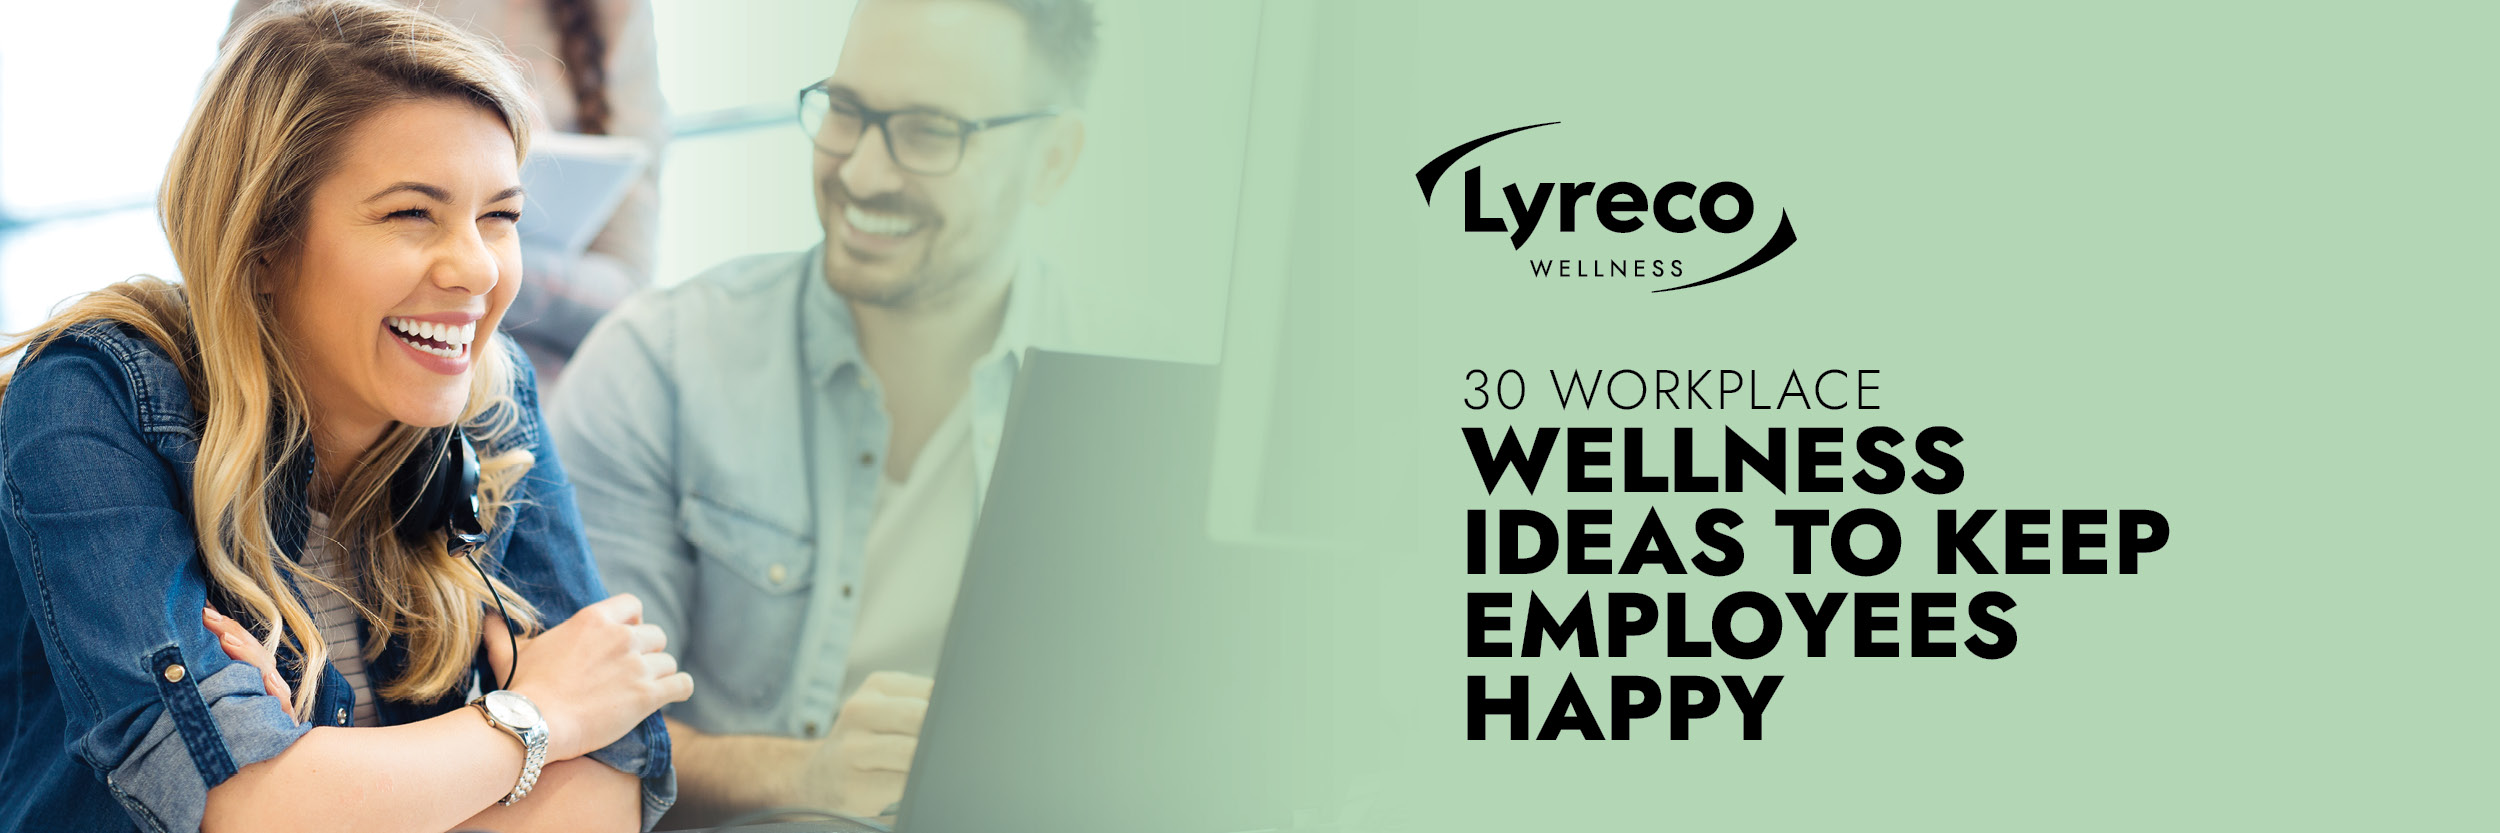 30 Workplace Wellness Ideas to Keep Employees Happy